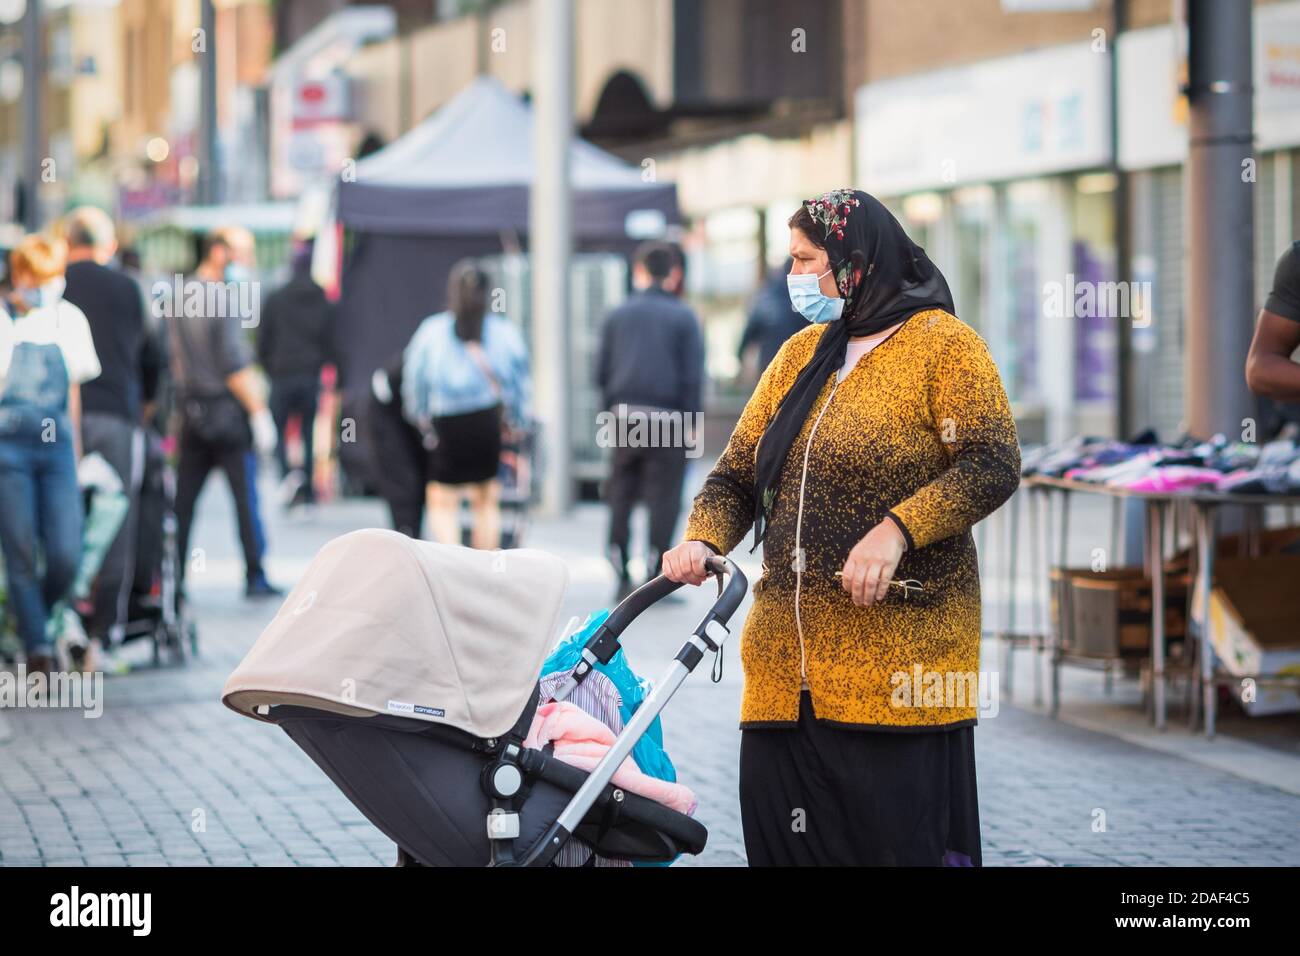 London, UK - 3 November, 2020 - A woman wearing a face mask and headscarf with a baby stroll while shopping at Walthamstow market Stock Photo